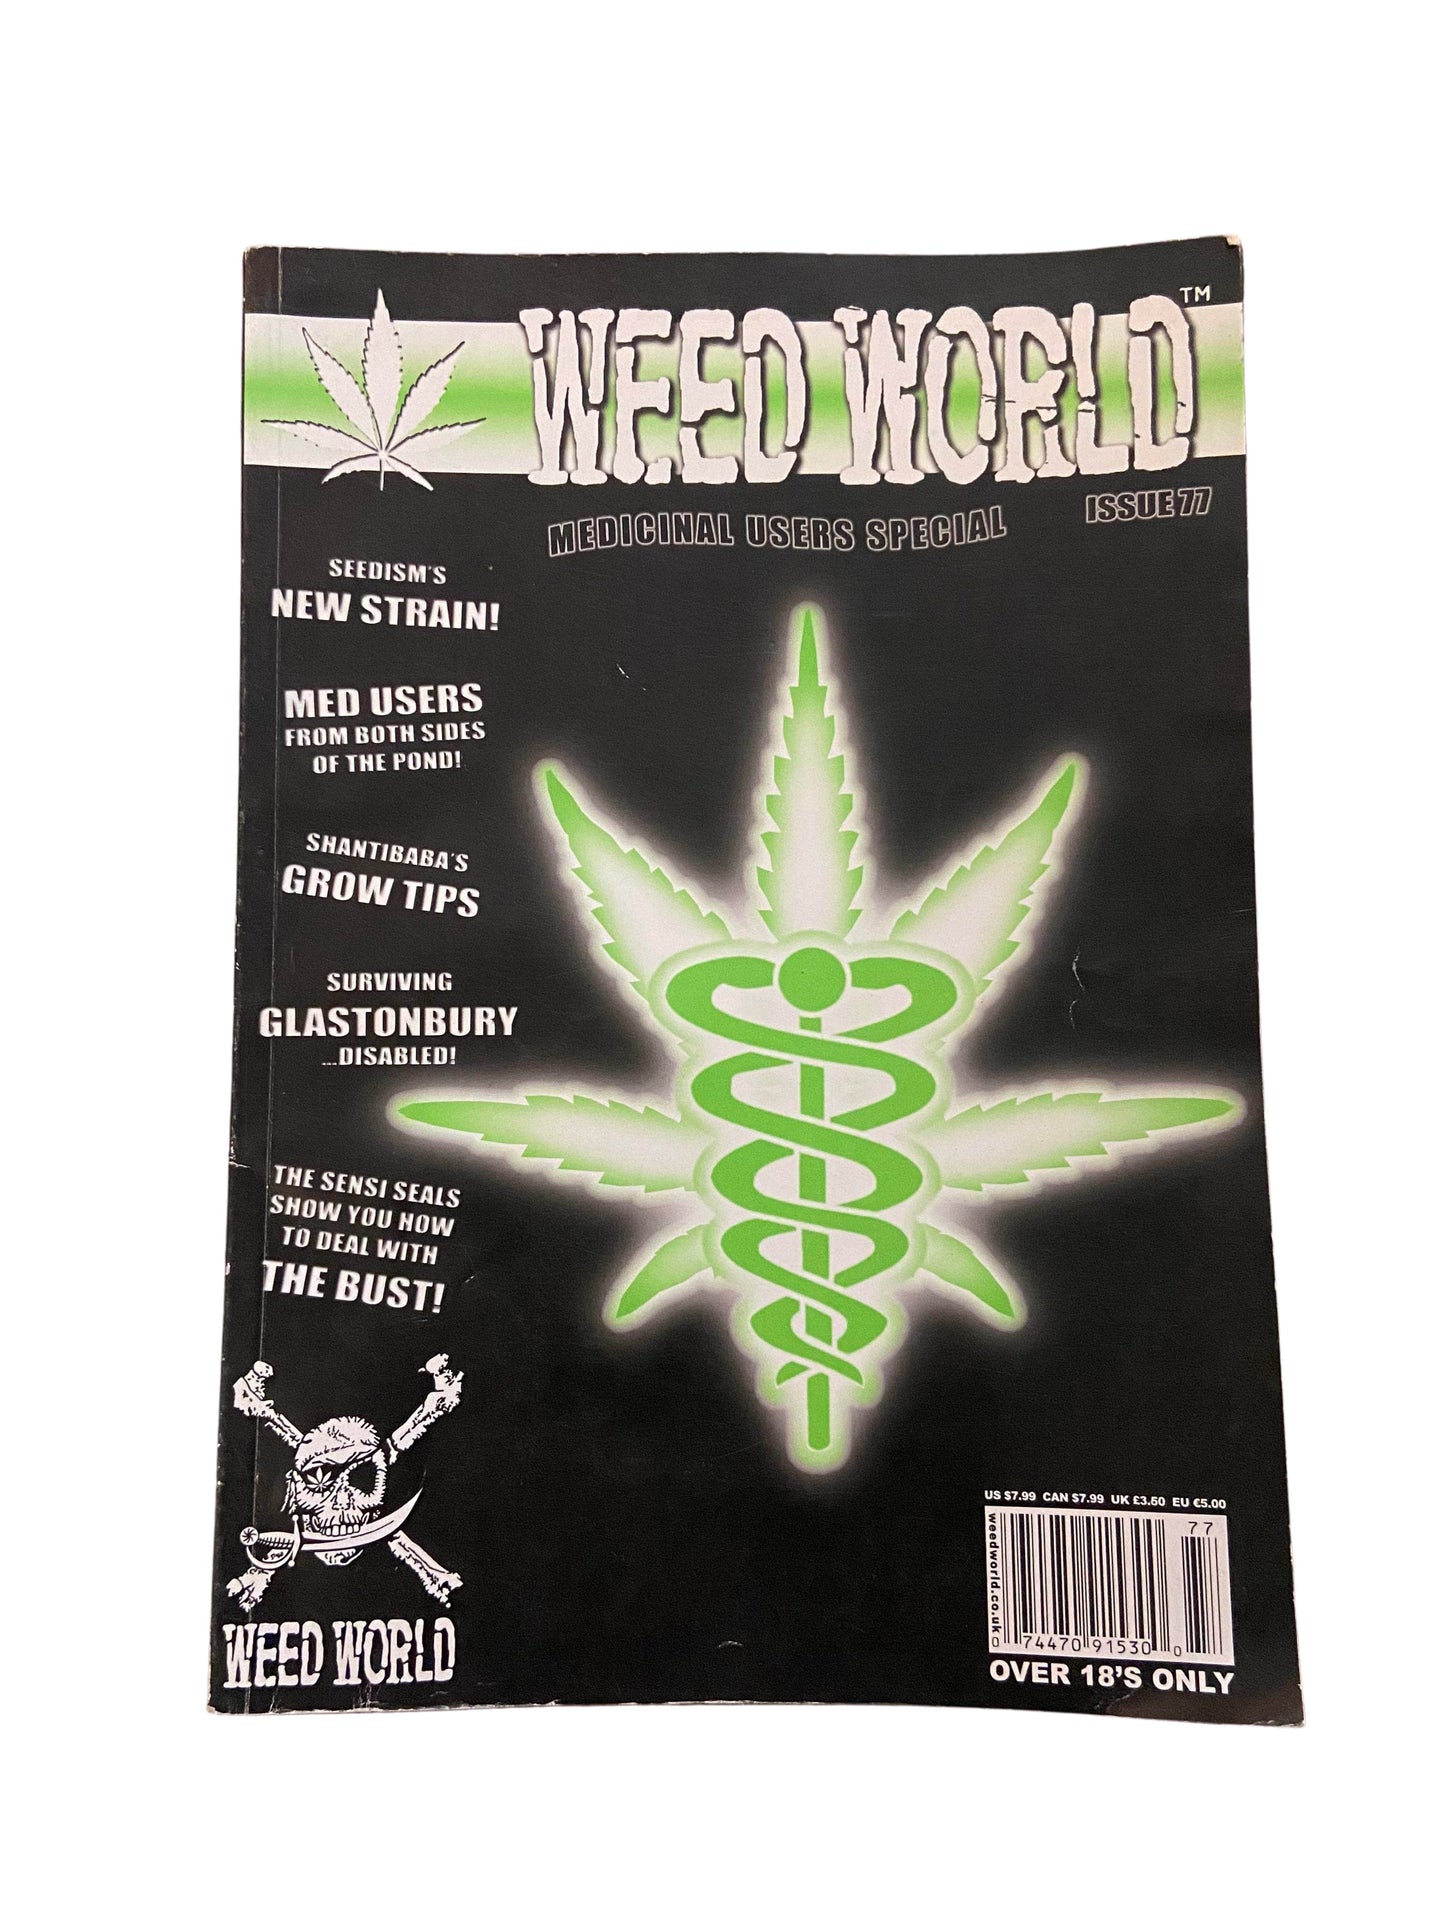 SILICON VALLEY: Weed World Magazine Issue 77